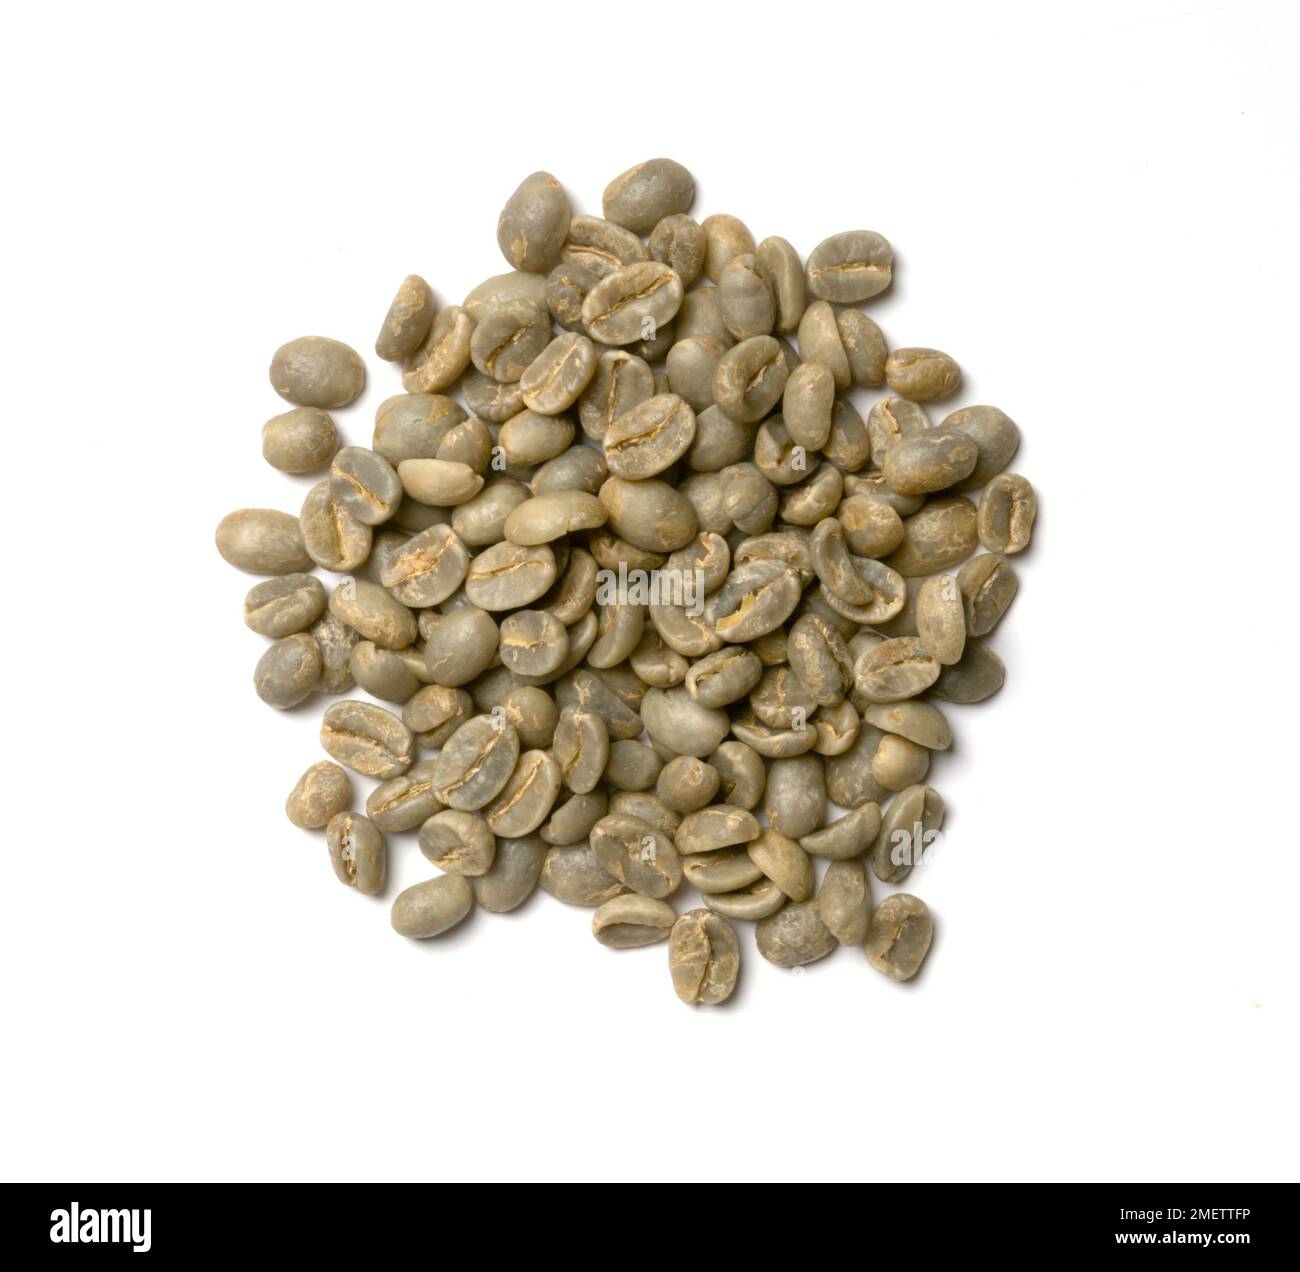 India, washed coffee beans Stock Photo